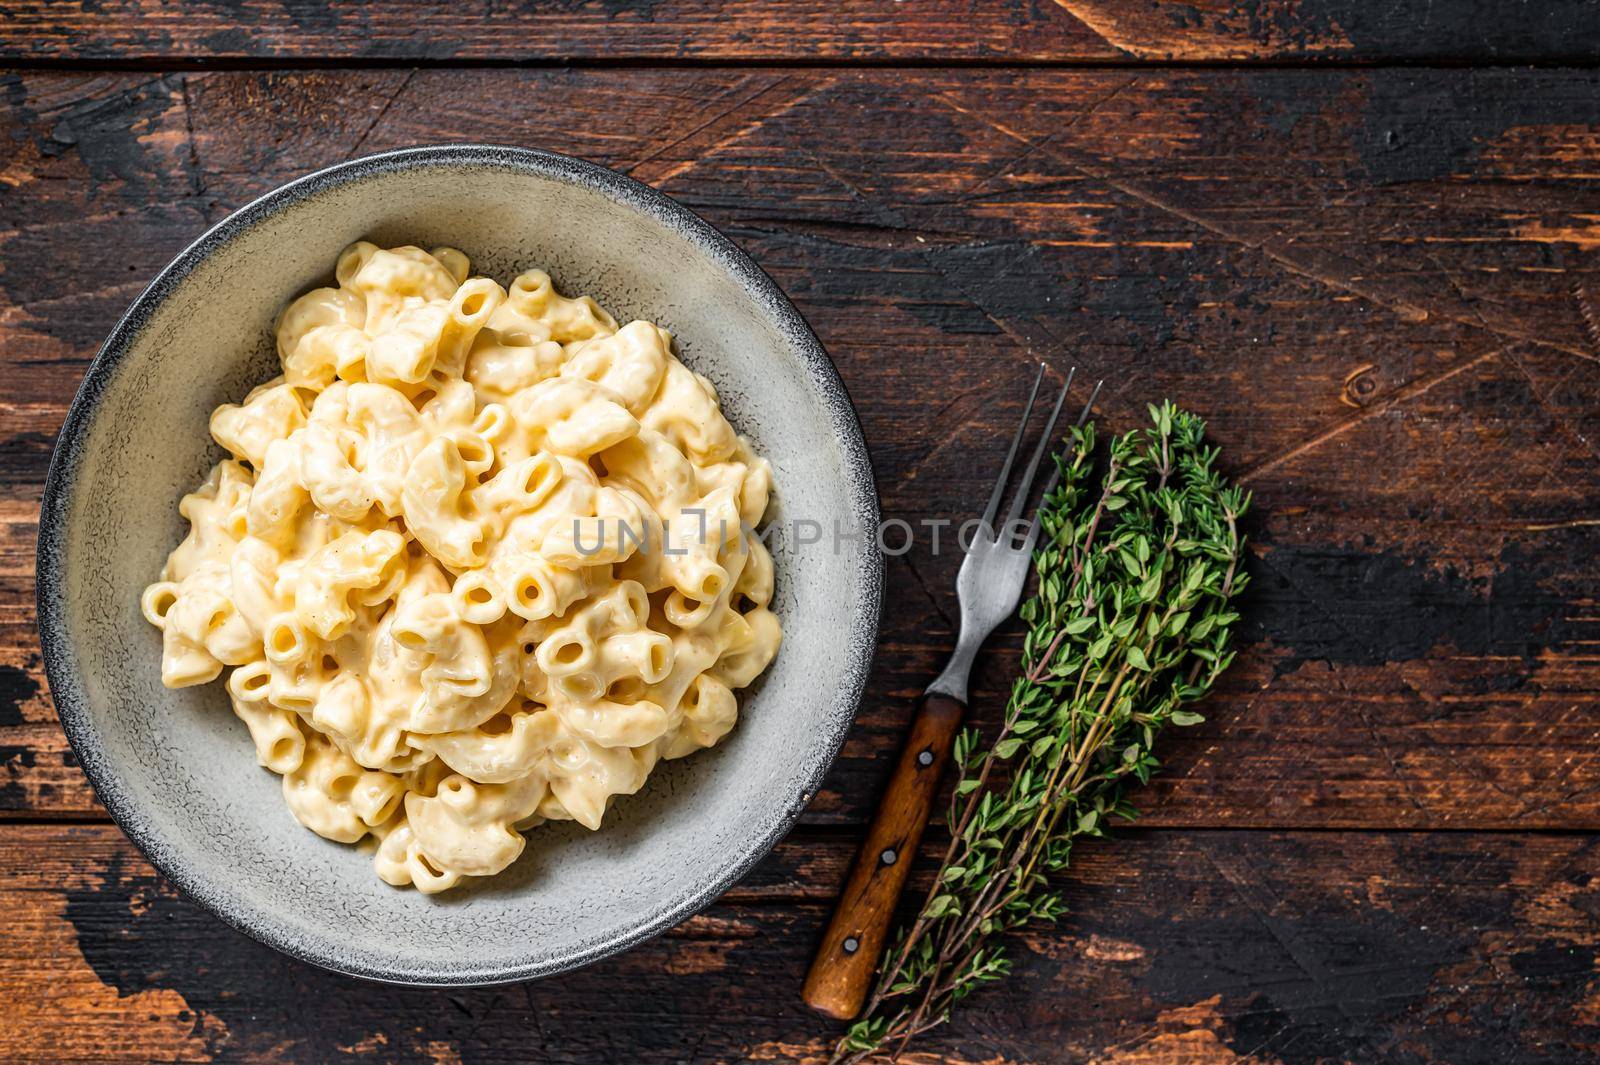 American dish Mac and cheese macaroni pasta with Cheddar. Dark wooden background. Top view. Copy space.